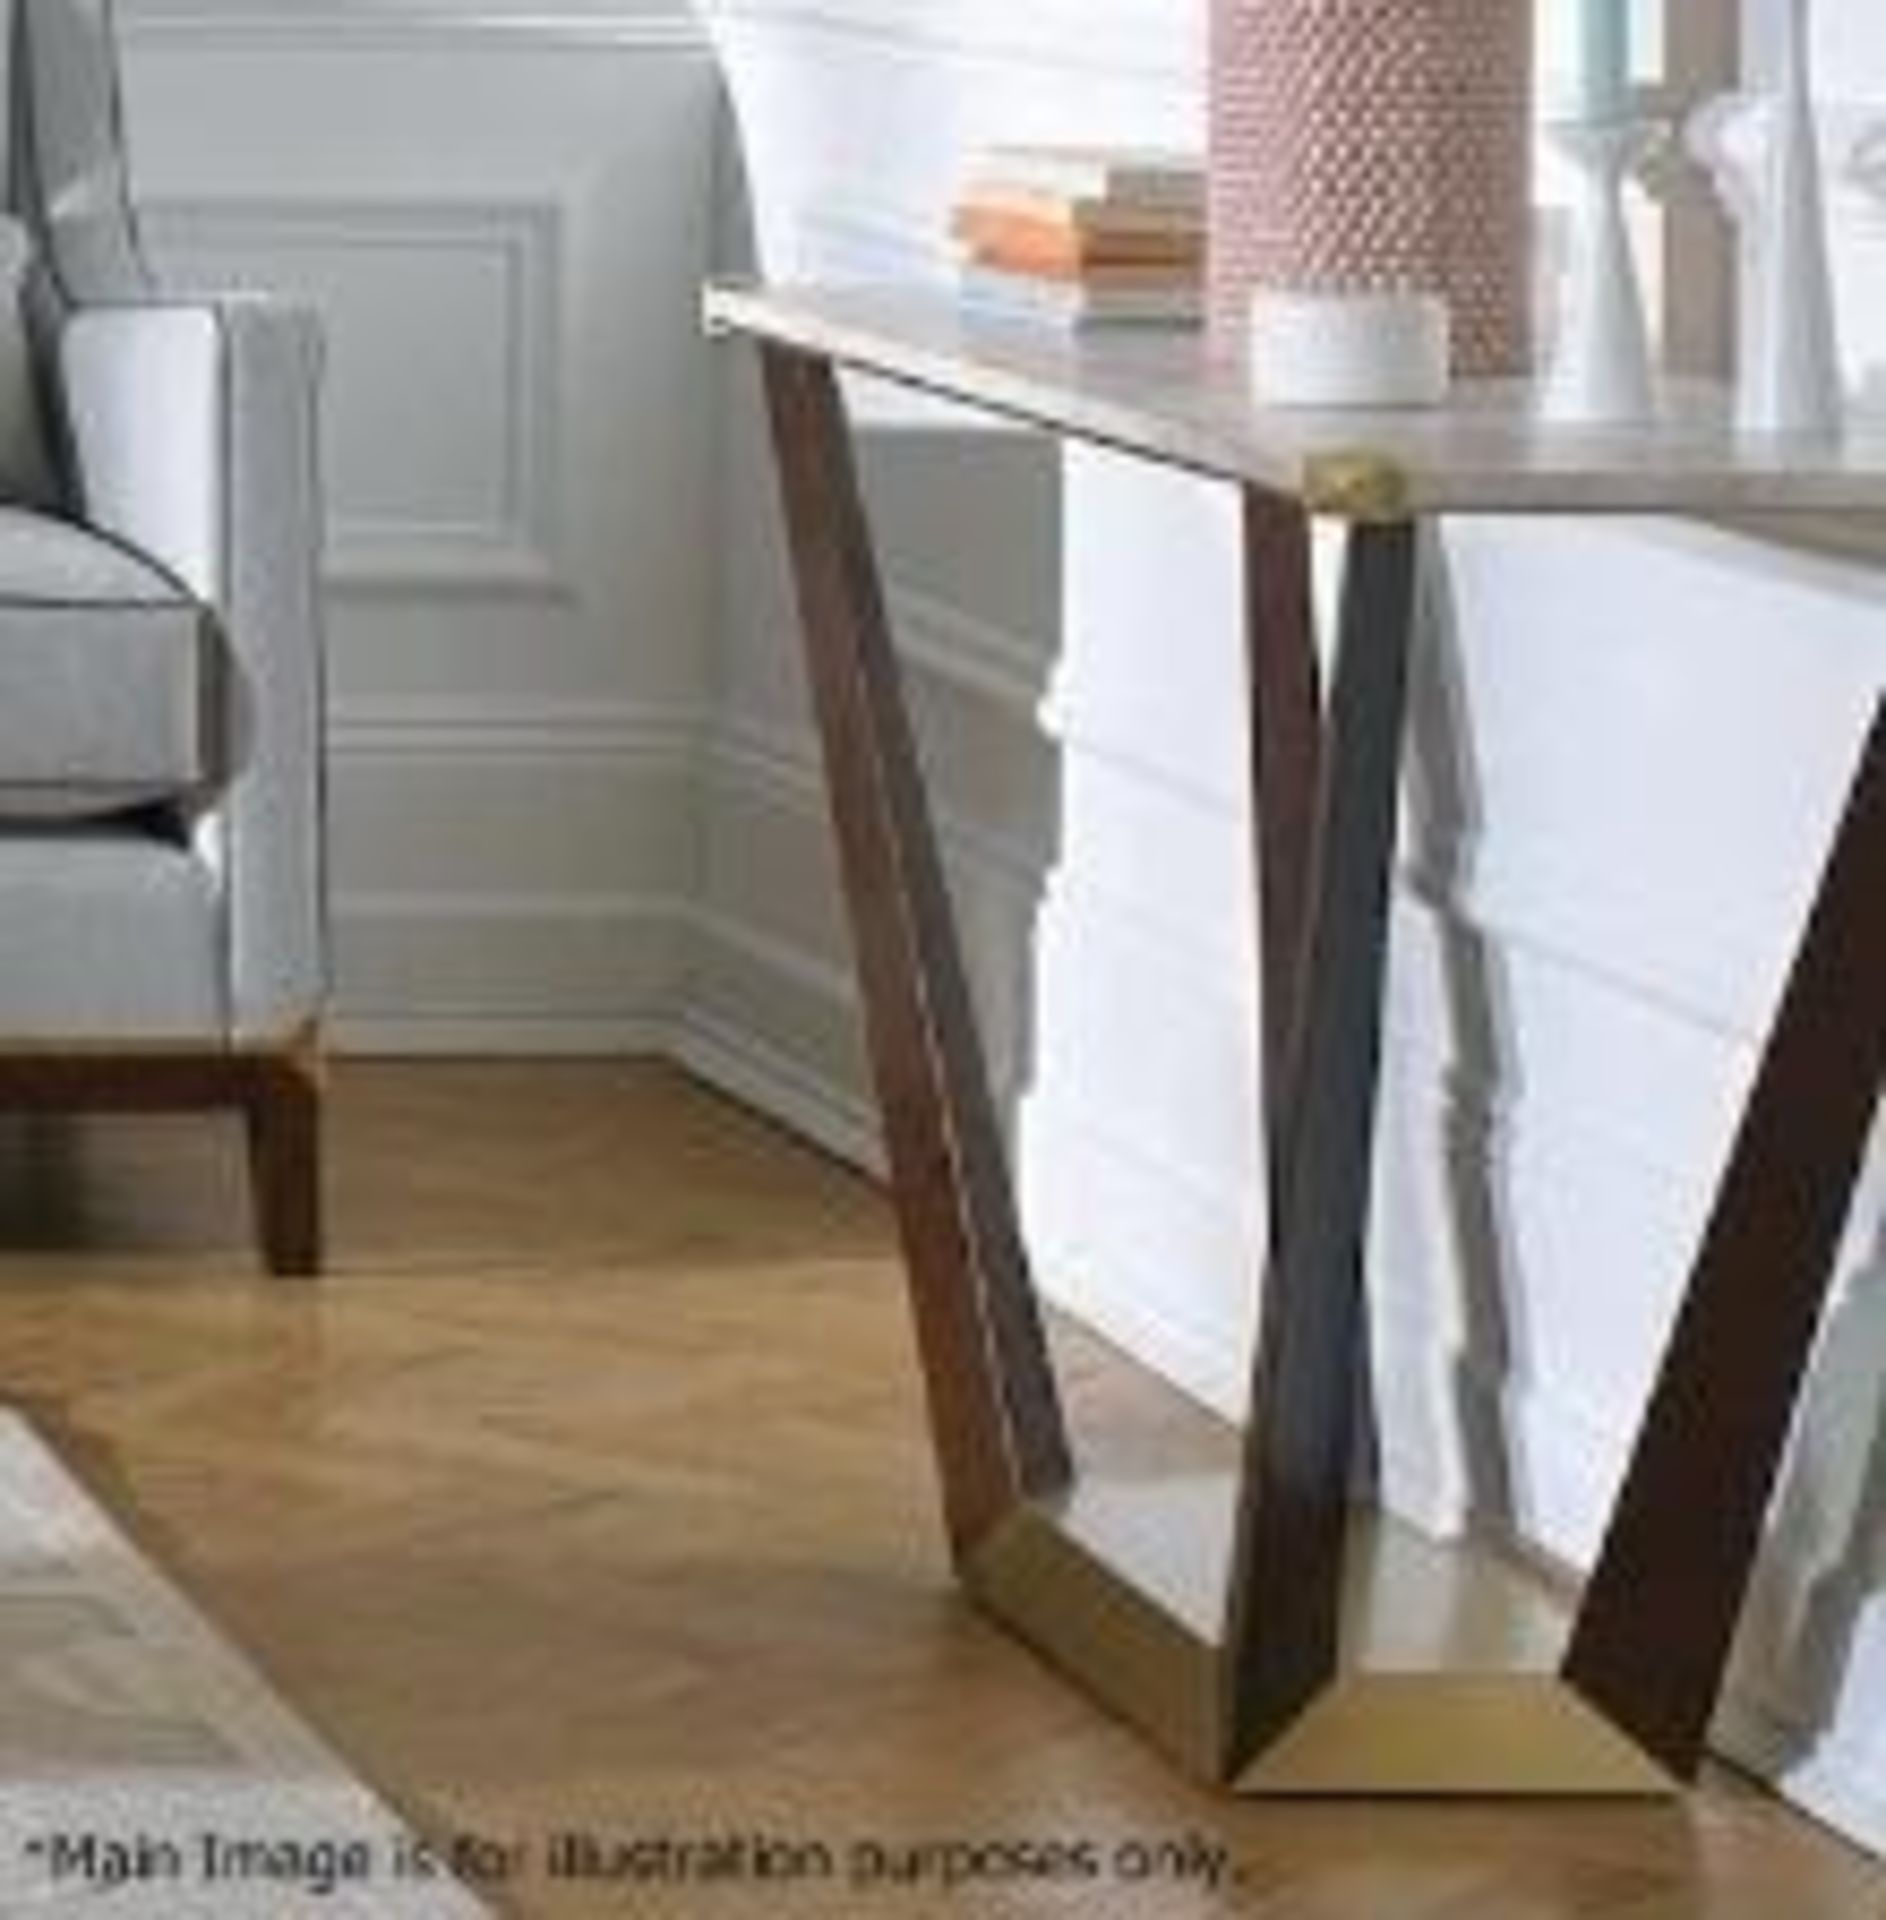 1 x PORADA Sayre Console Table (Base Only) - Ref: 5568974 NP2/18 - CL011 - Location: Altrincham WA14 - Image 2 of 7